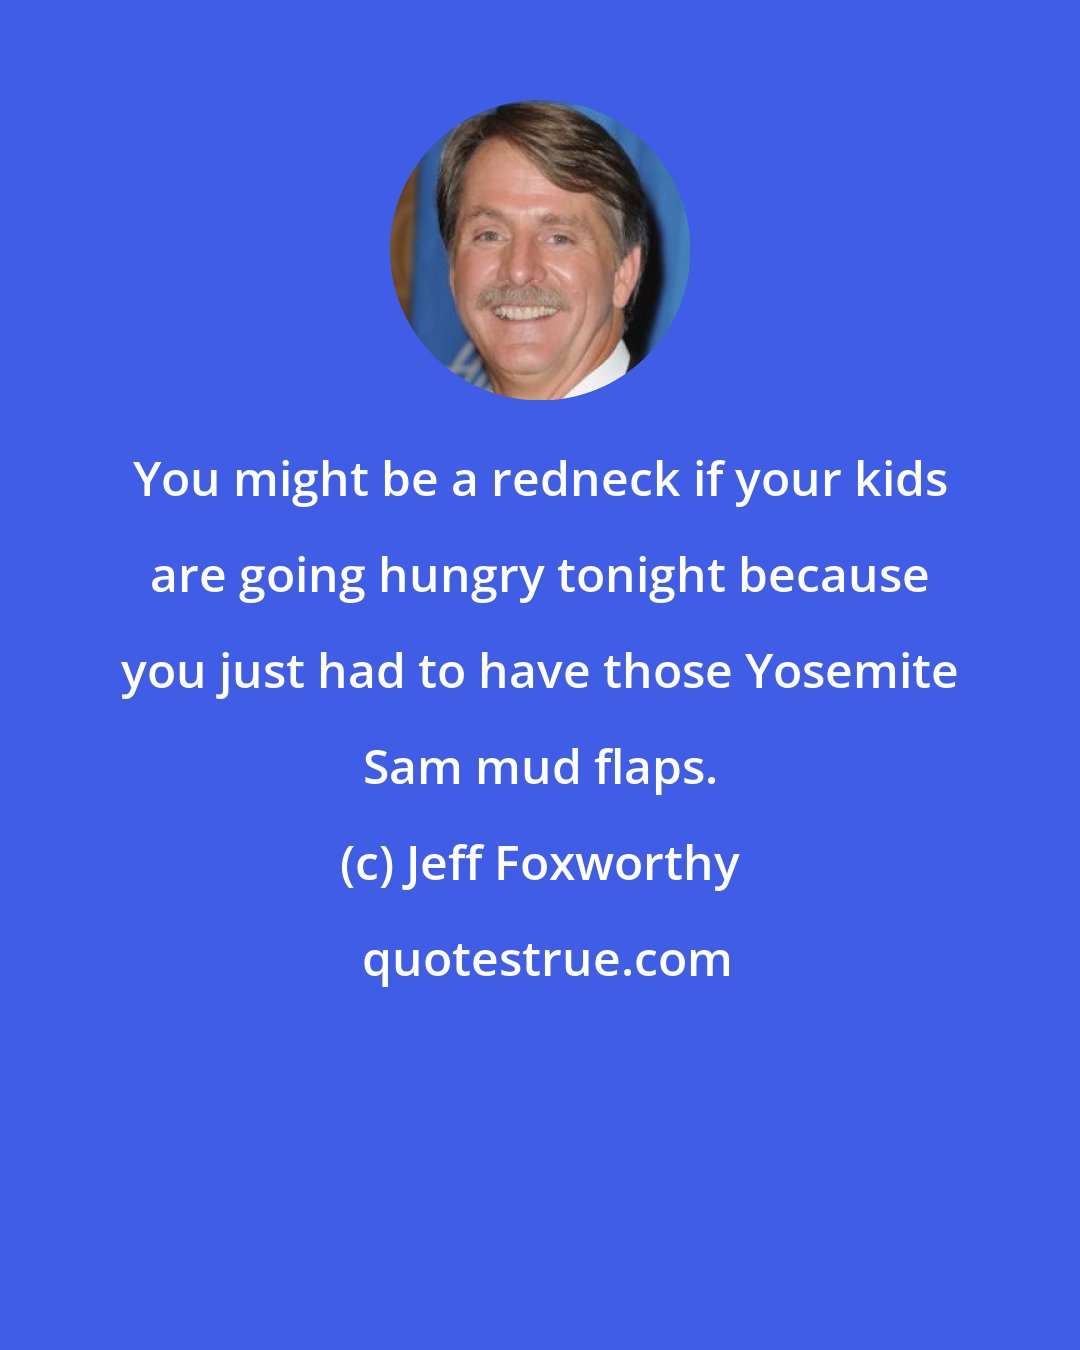 Jeff Foxworthy: You might be a redneck if your kids are going hungry tonight because you just had to have those Yosemite Sam mud flaps.